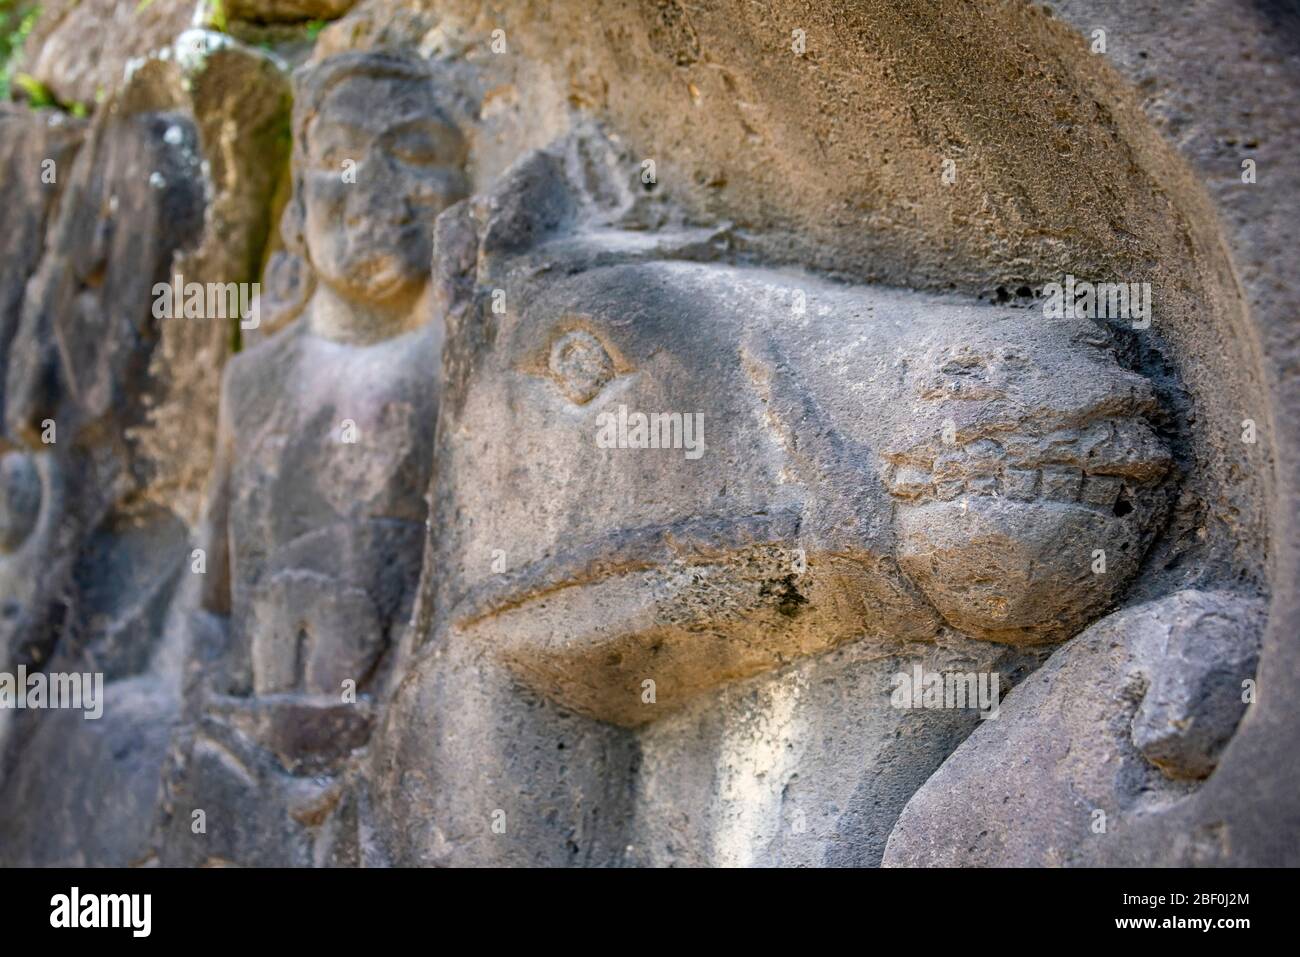 Horizontal close up view of a horse at the Yeh Pulu Relief in Bali, Indonesia. Stock Photo